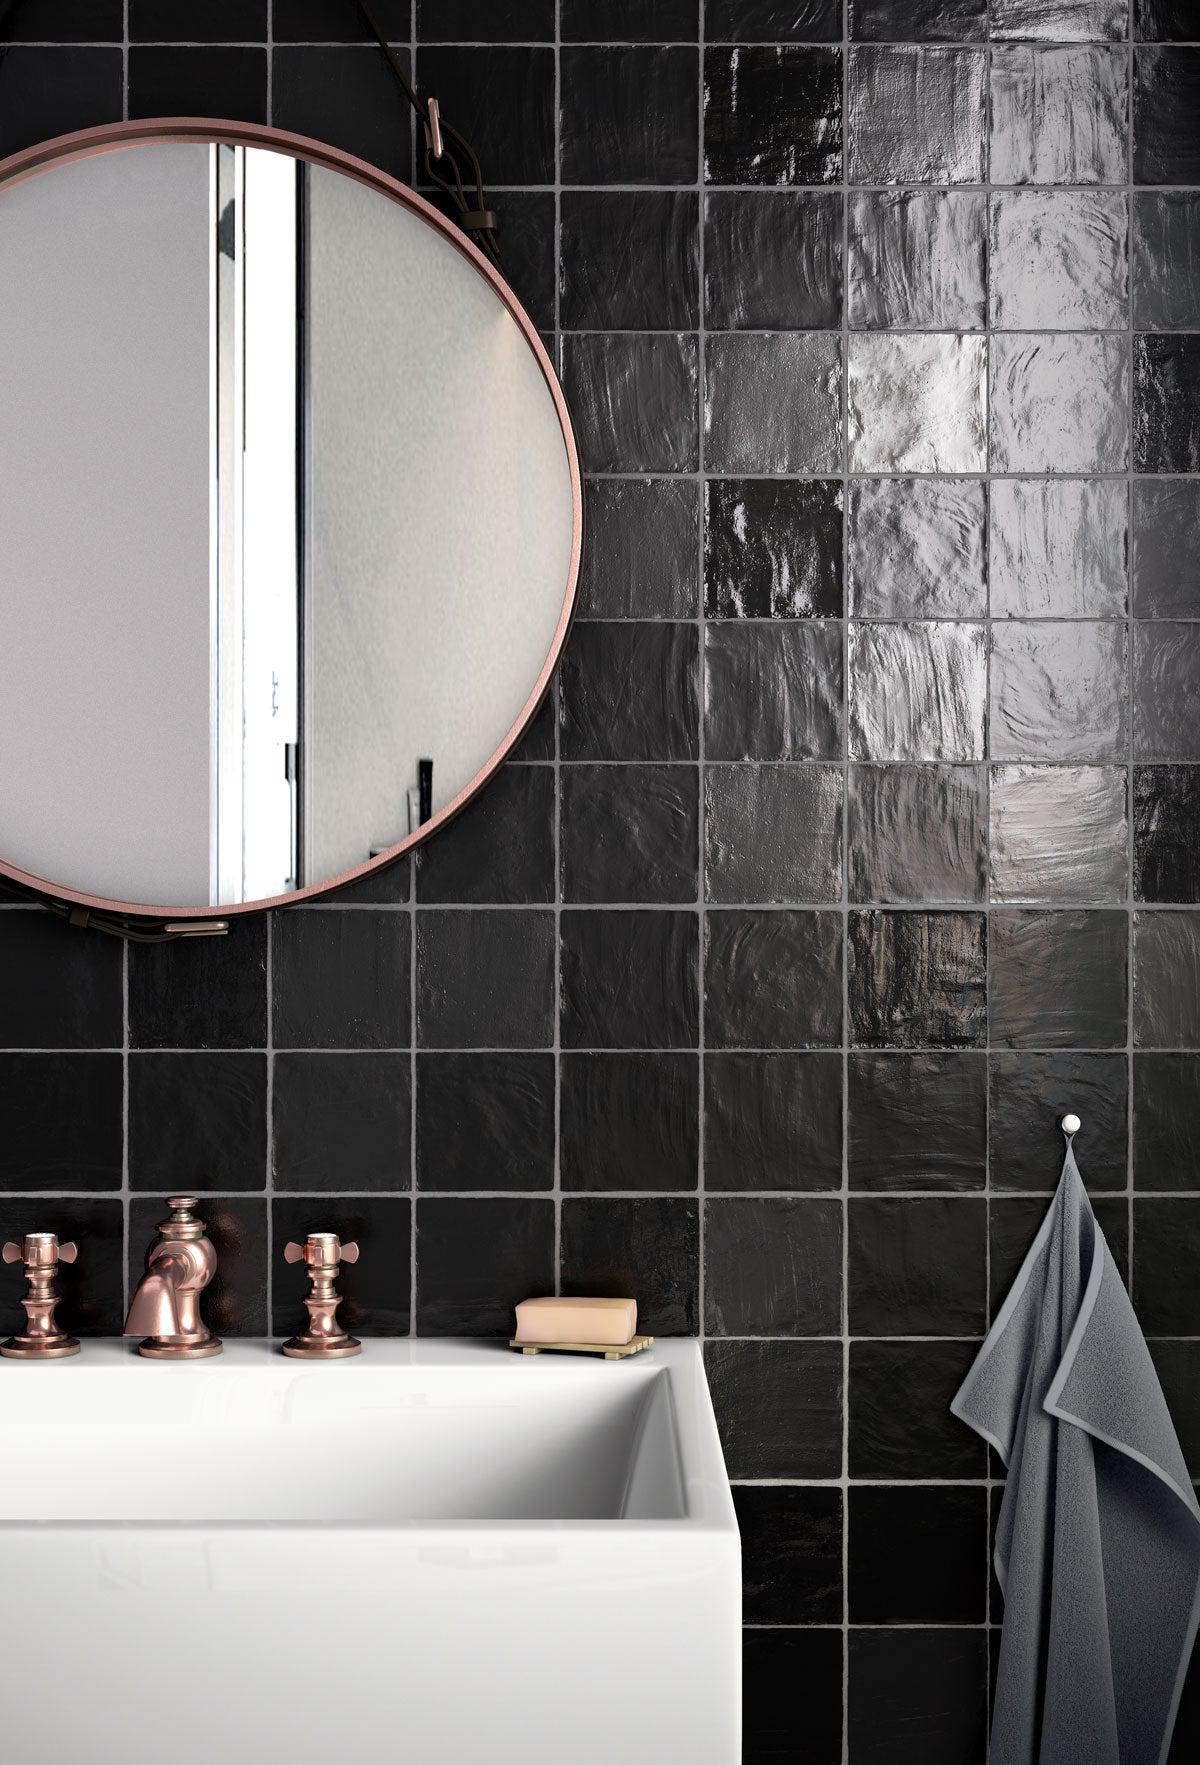 Mallorca Black Glazed Ceramic Square Tiles for a Modern Bathroom with Copper Fixtures